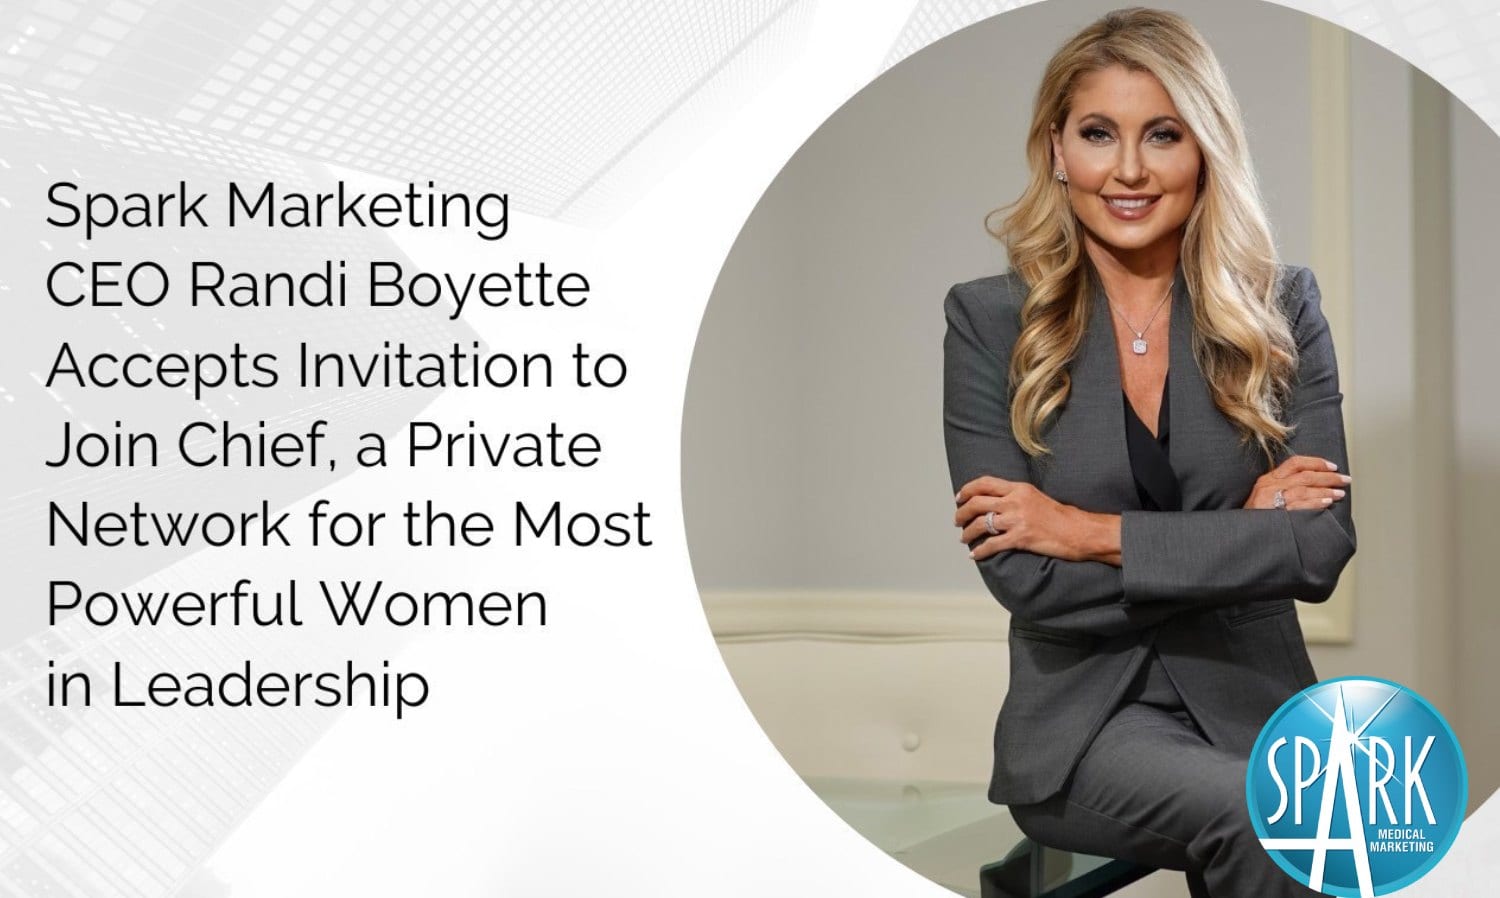 Spark Marketing CEO Randi Boyette Accepts Invitation to Join Chief, a Private Network for the Most Powerful Women in Leadership